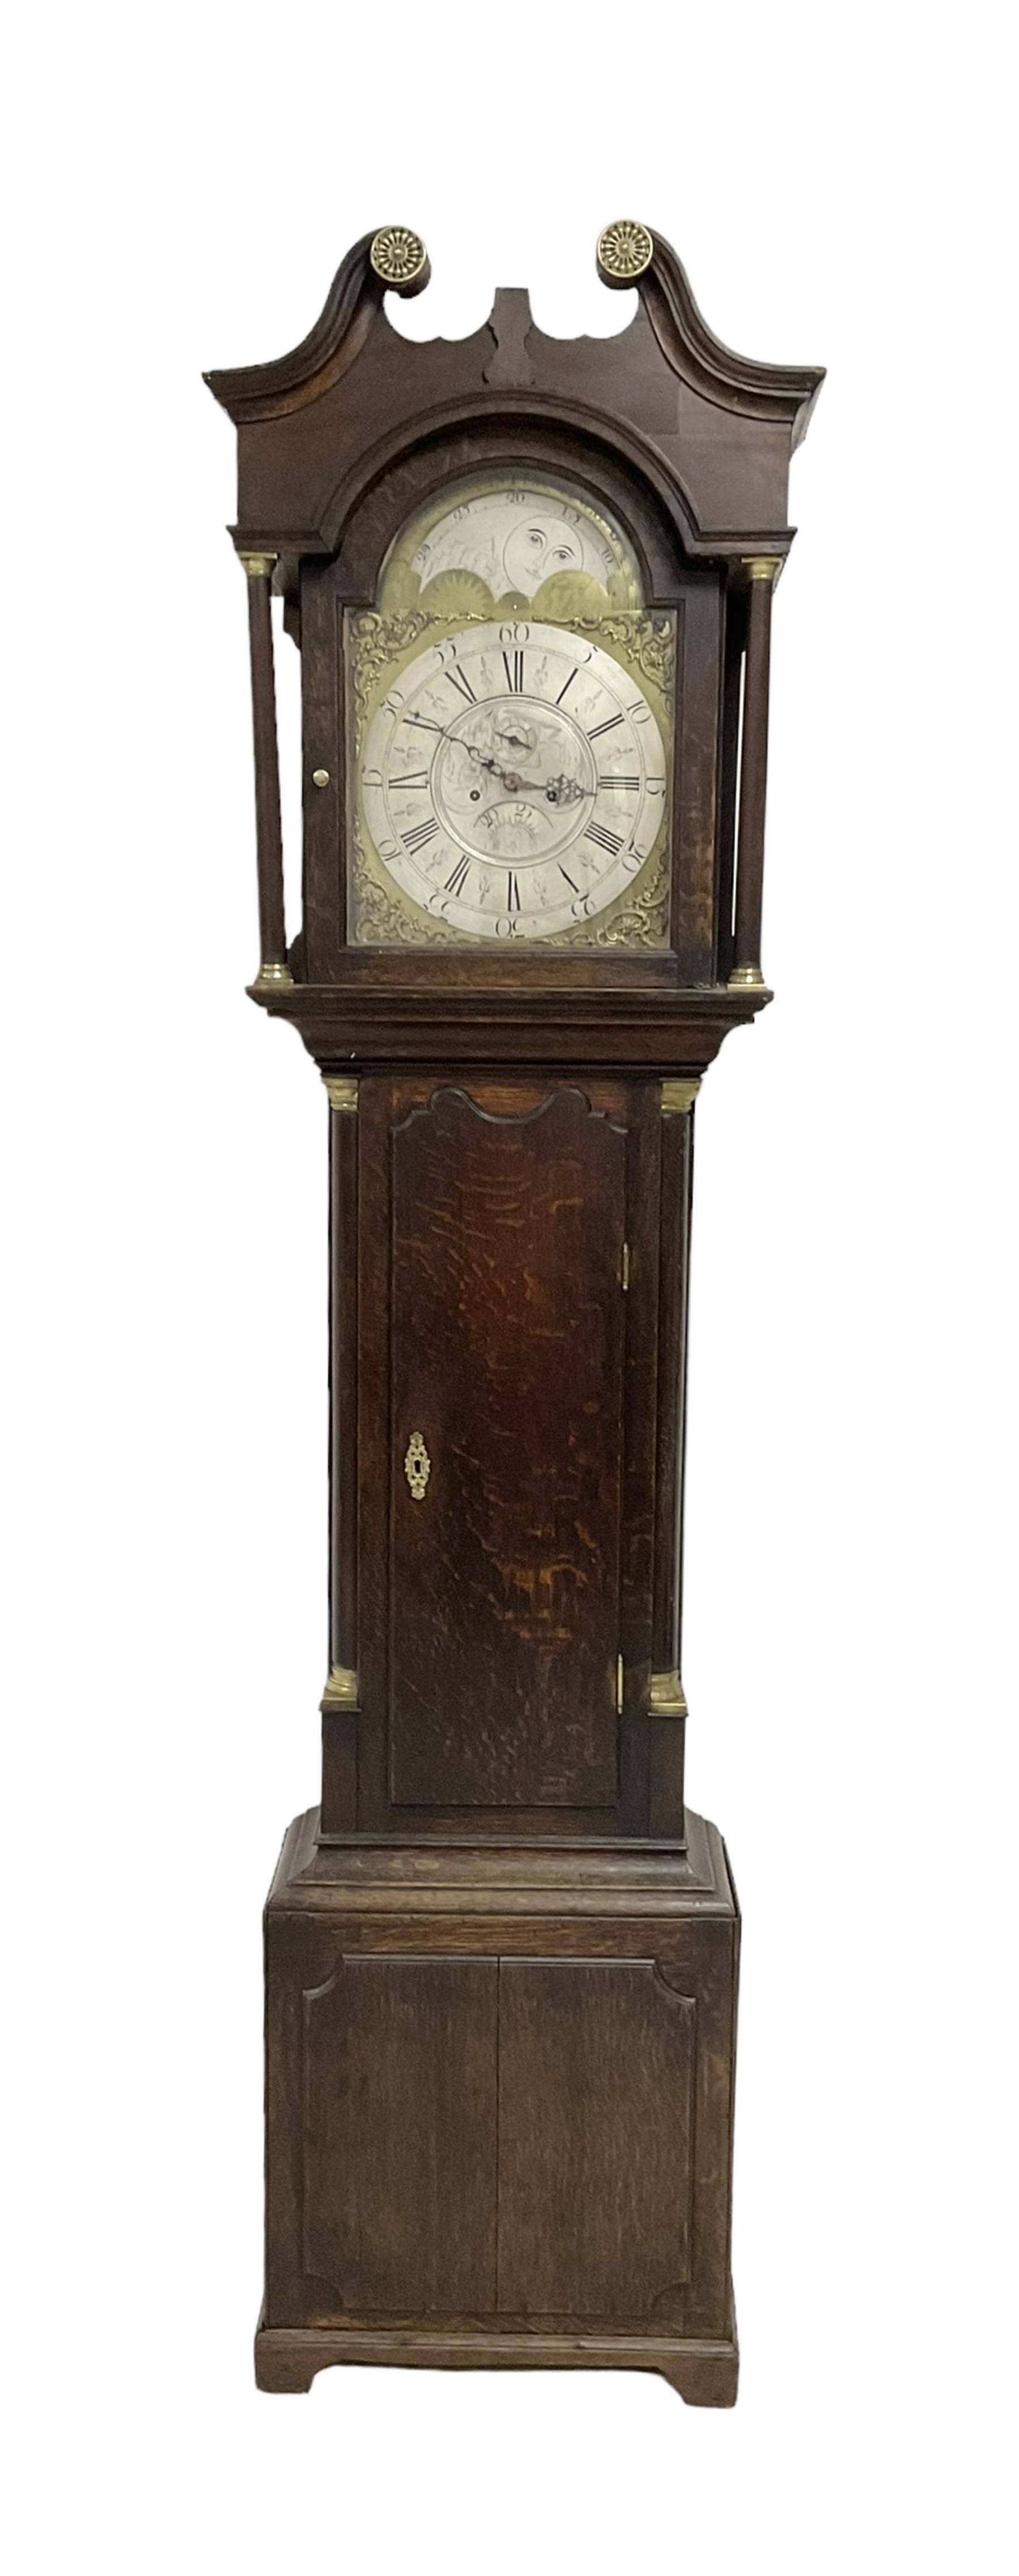 Thomas Lister of Halifax - Late 18th century oak cased 8-day longcase clock with a swans neck pedime